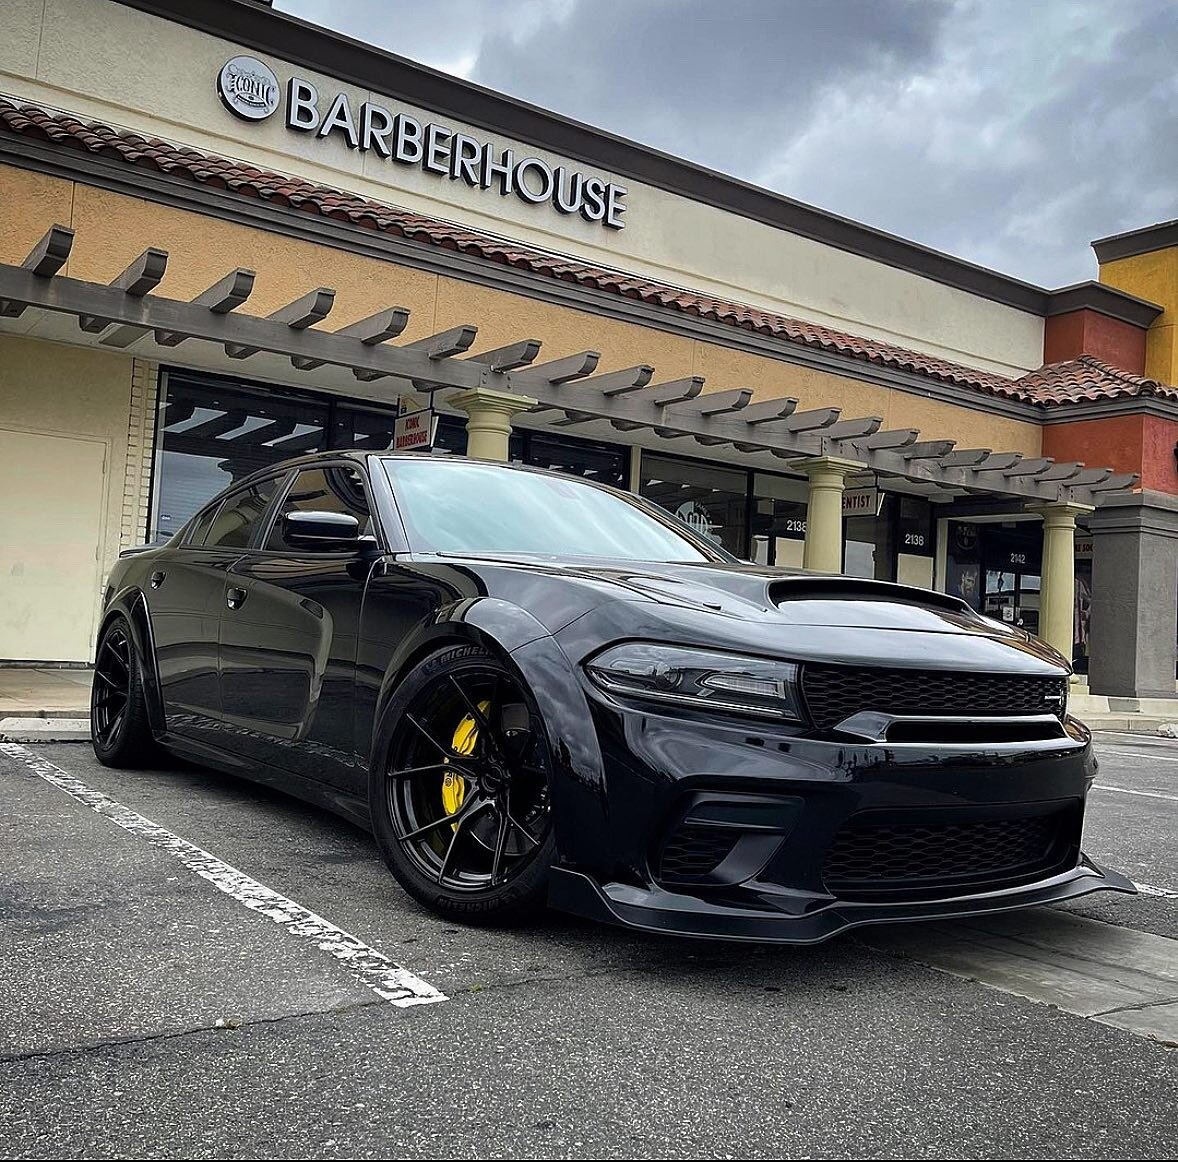 Stance SF 07 in Gloss Black 20x11 fitted on this Wide Body Hellcat! Don&rsquo;t let them tell to you to use spacers!!! 🤣🤣🤣 We build it the right way 💪🏽💪🏽 Give us a call today!!! #stance #stancewheels #modifiedconcepts #mopar #moparornocar #hel